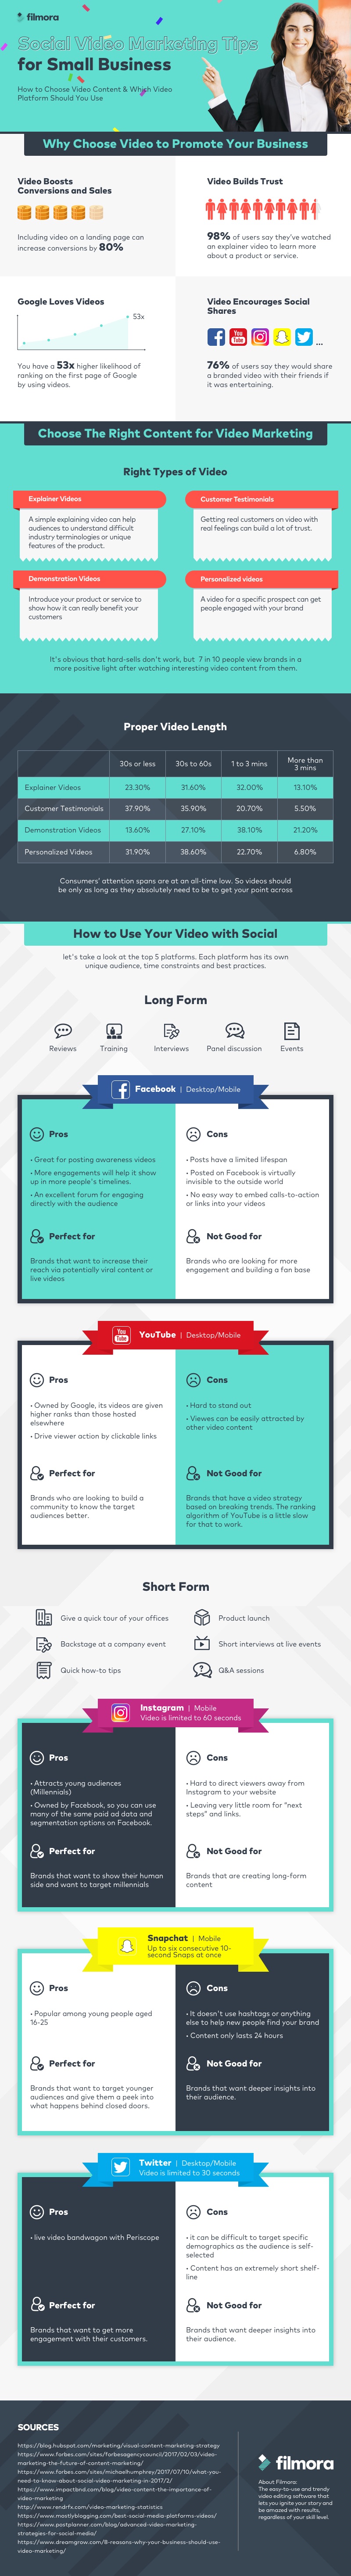 Social Video Infographic